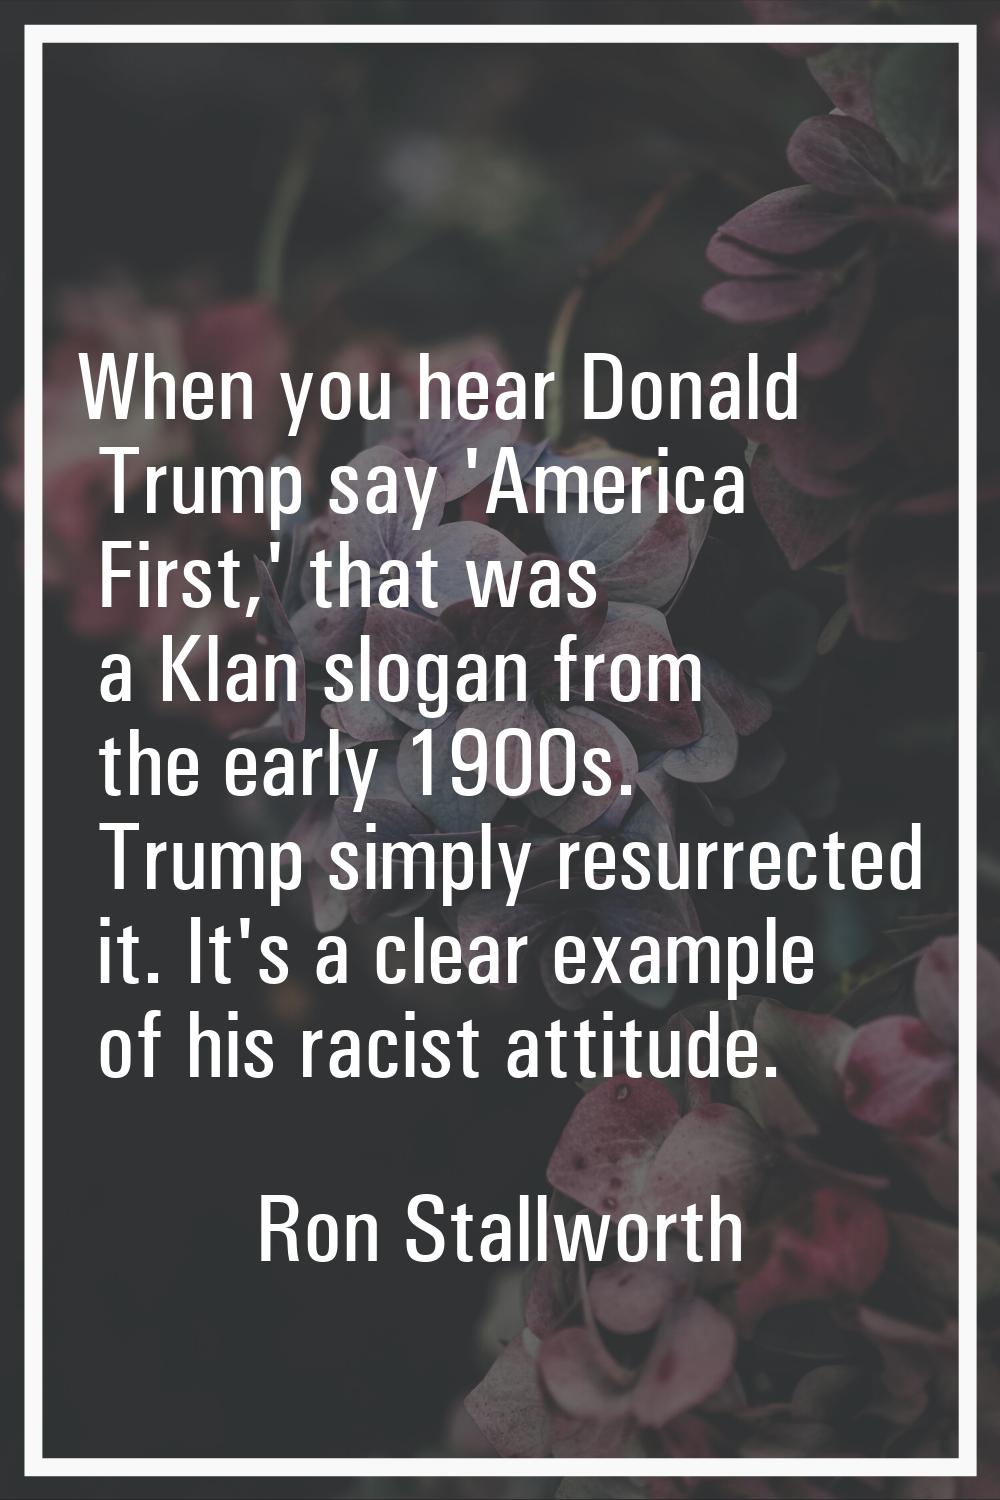 When you hear Donald Trump say 'America First,' that was a Klan slogan from the early 1900s. Trump 